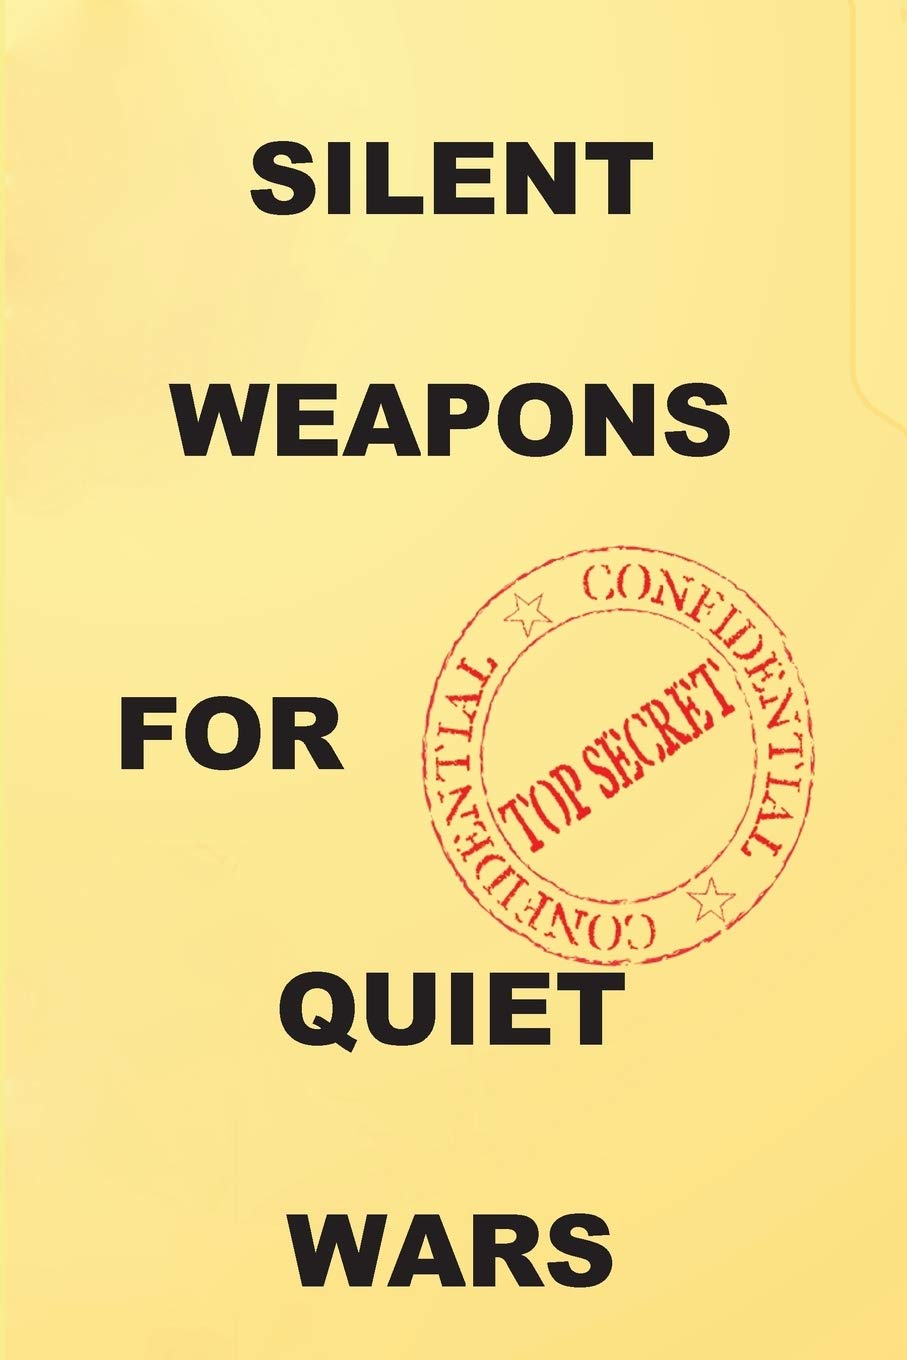 Silent Weapons for Quiet Wars: An Introductory Programming Manual #Ebooks #CheaperThanAmazon  #Conspiracies #InstantDownload #PeopleFirstMTP